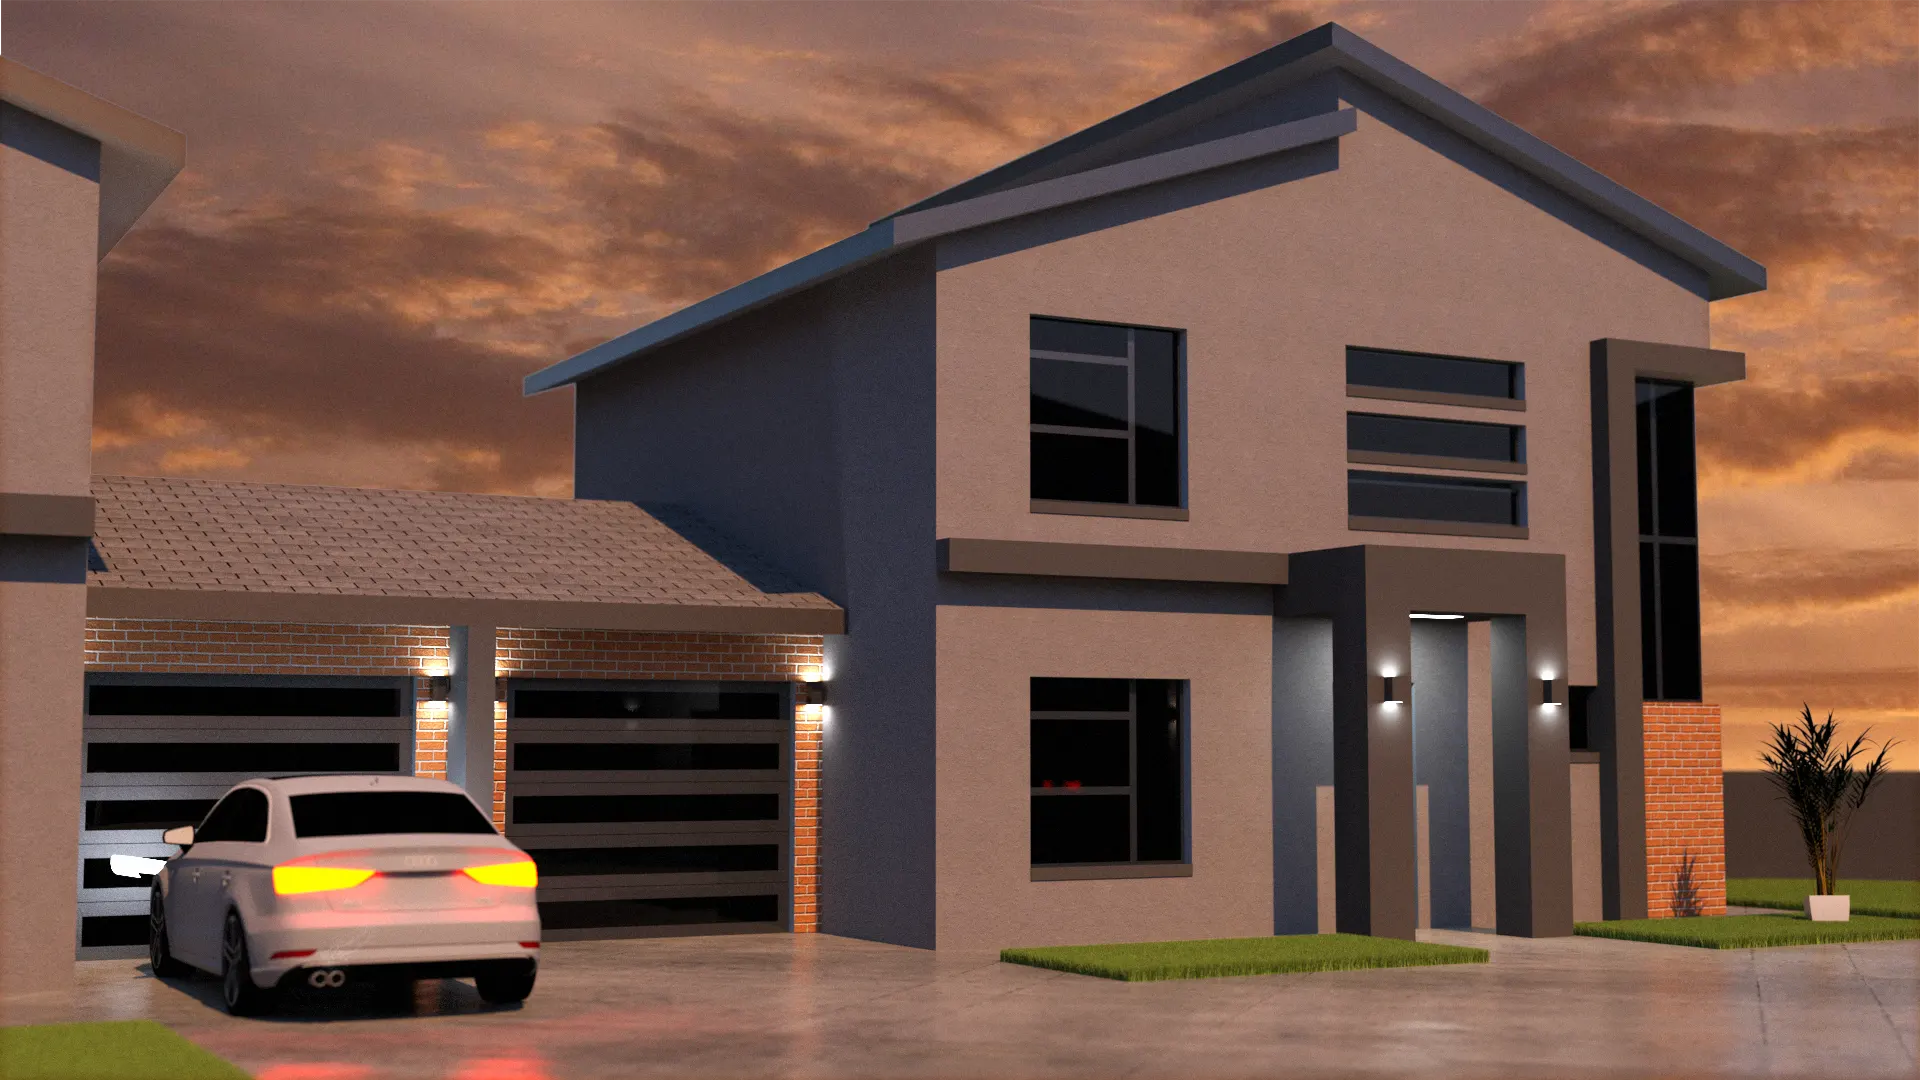 Photorealistic 3D Rendering Services,3D Rendering,3D Rendering Services,Photorealistic 3D Rendering,3D rendering polokwane,3d rendering south africa,3D rendering services south africa,Still Image 3D Rendering